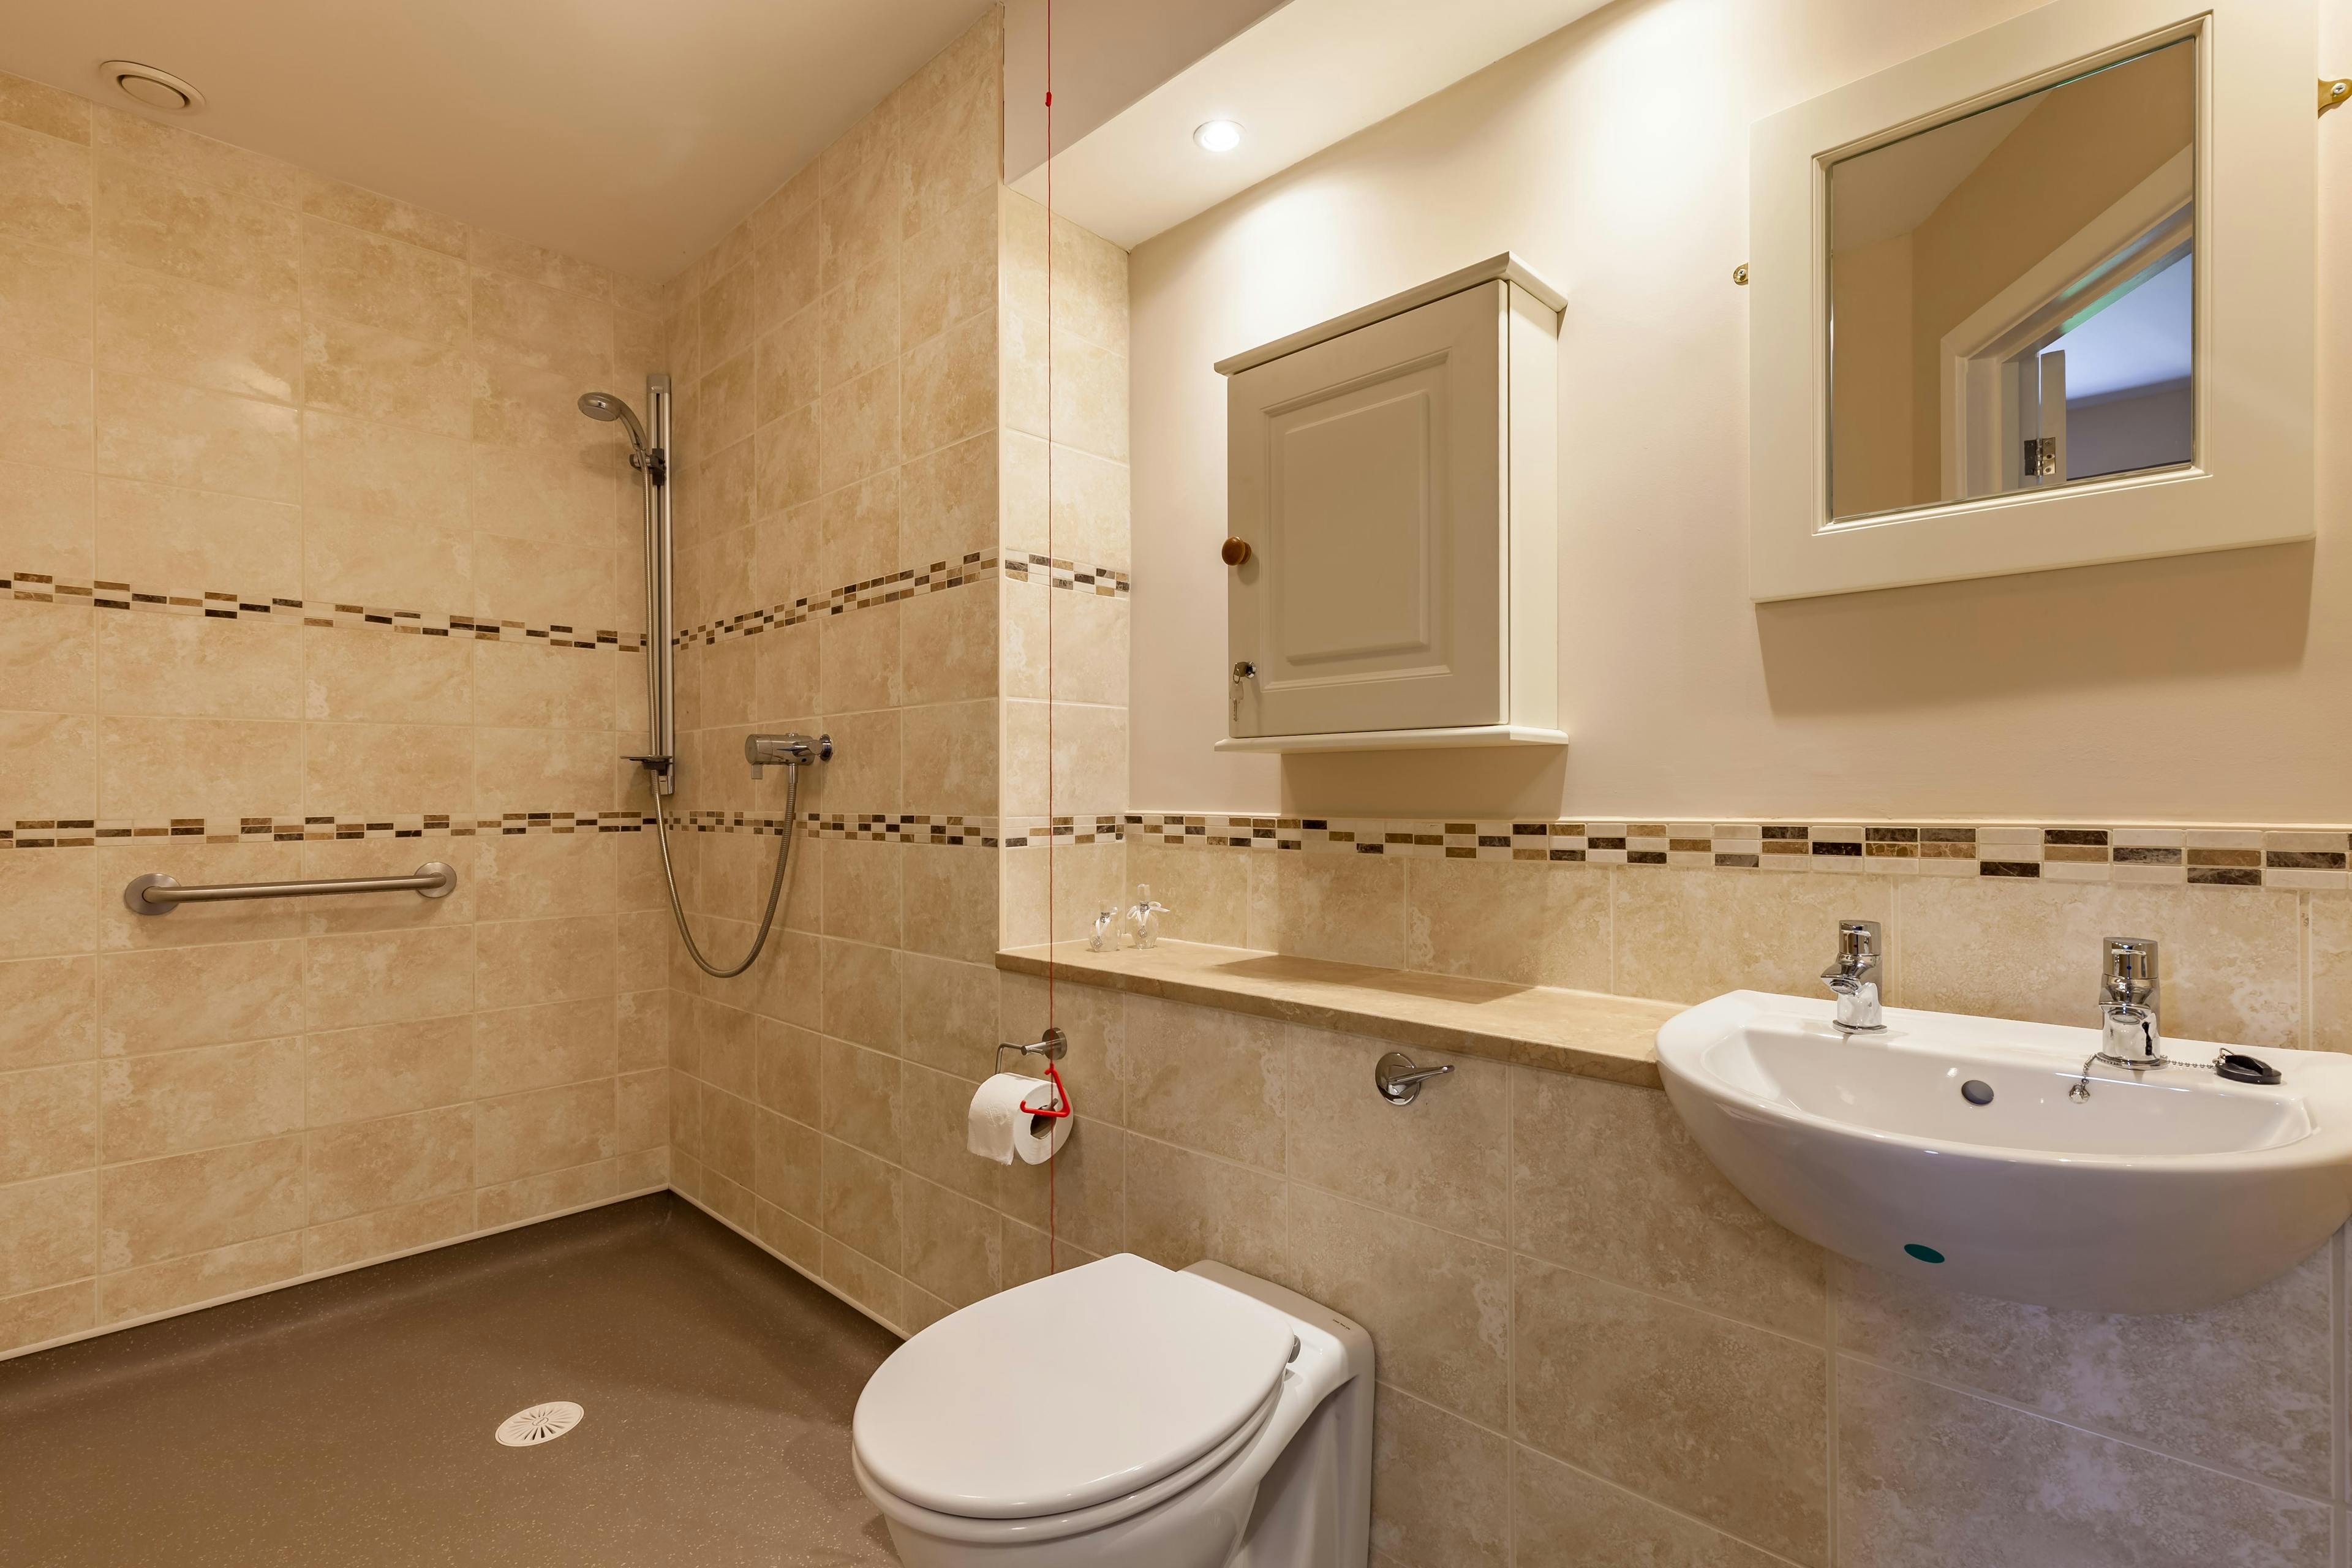 Bathroom at Lindum House Care in Beverley, East Riding of Yorkshire